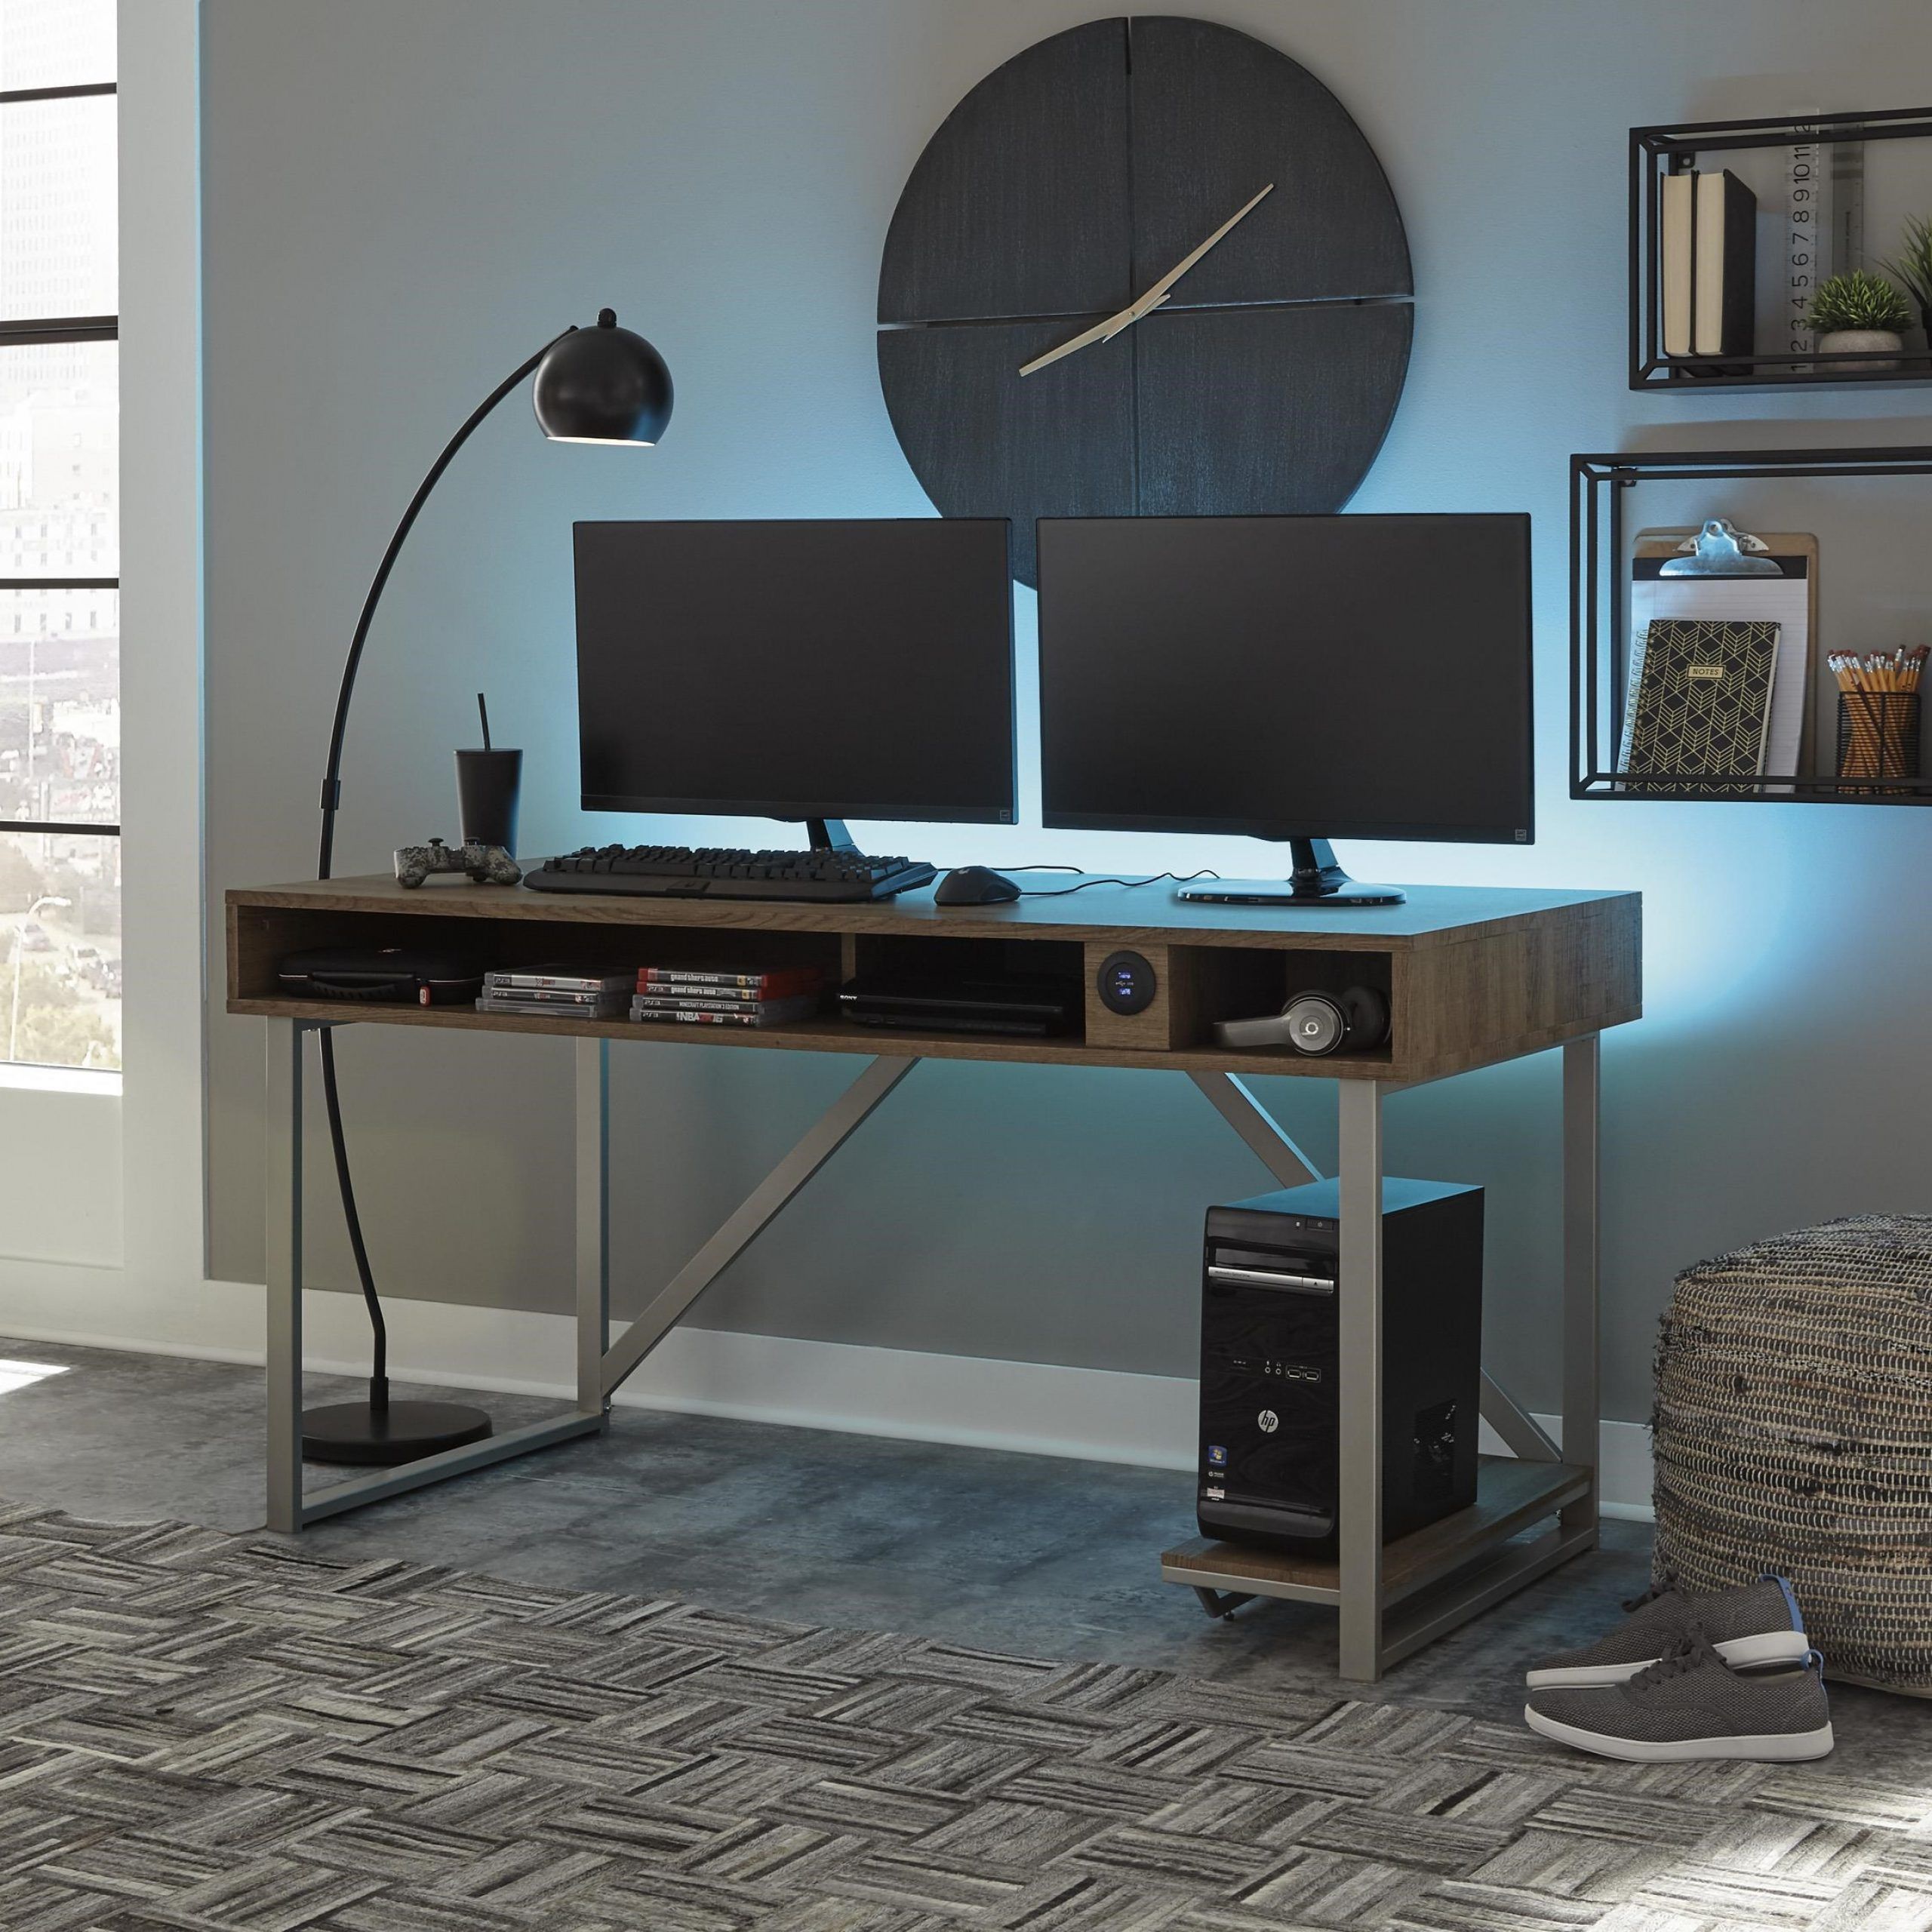 Signature Designashley Barolli H700 26 Gaming Desk | Sam Levitz With Regard To Gaming Desks With Built In Outlets (View 10 of 15)